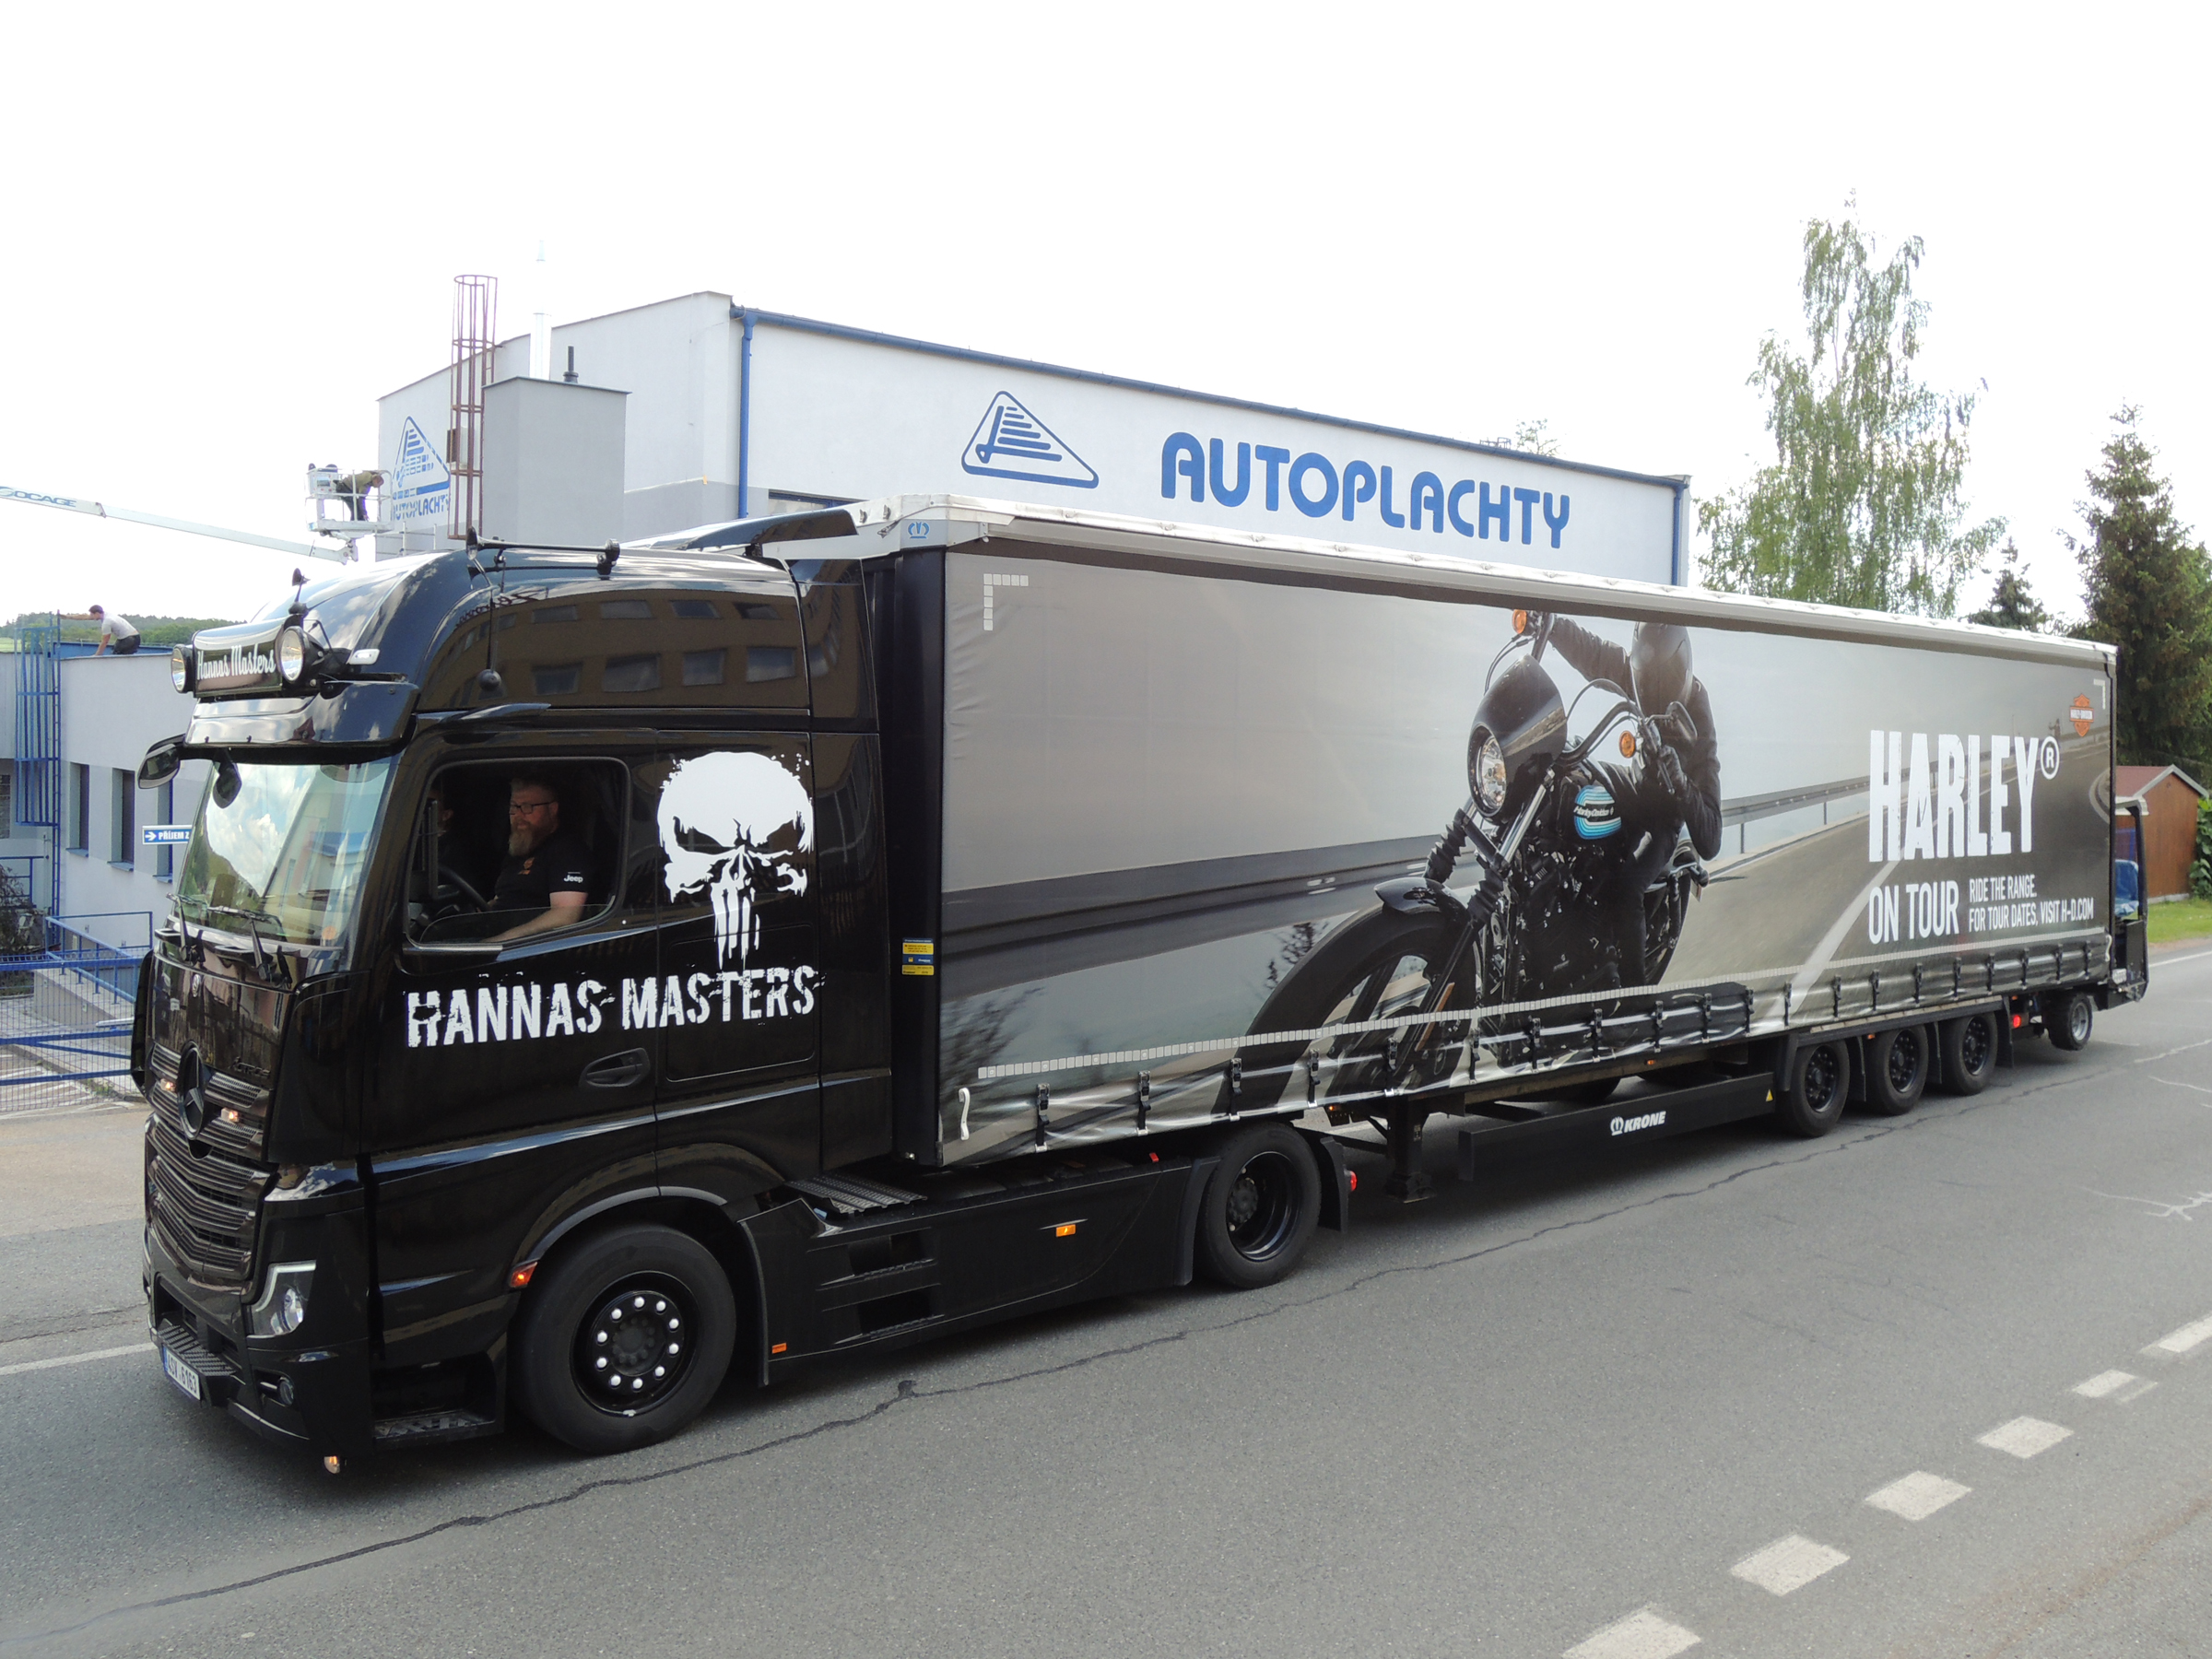 Harley on Tour truck